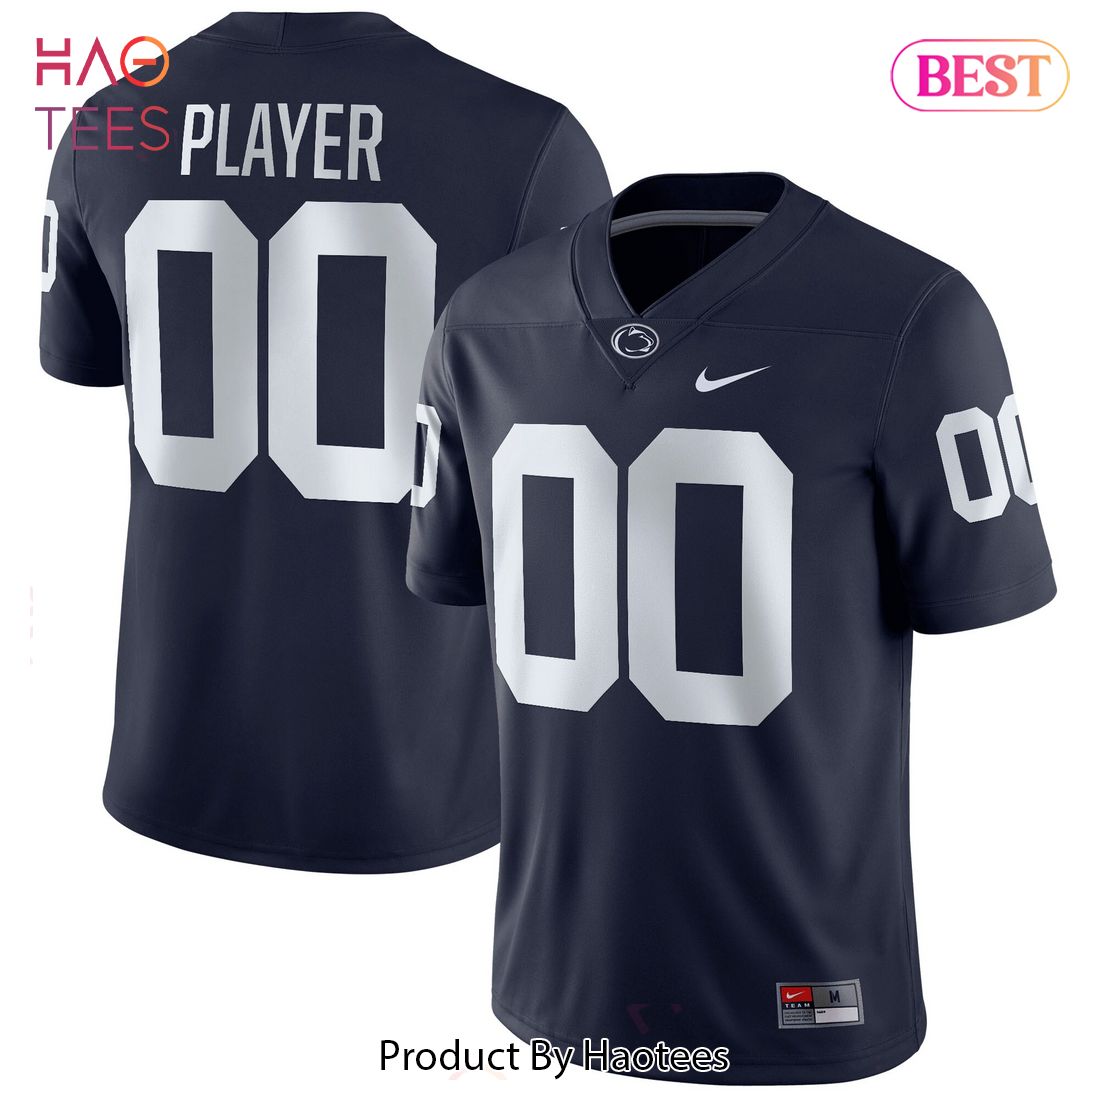 Penn State Nittany Lions Nike Pick-A-Player NIL Replica Football Jersey Navy